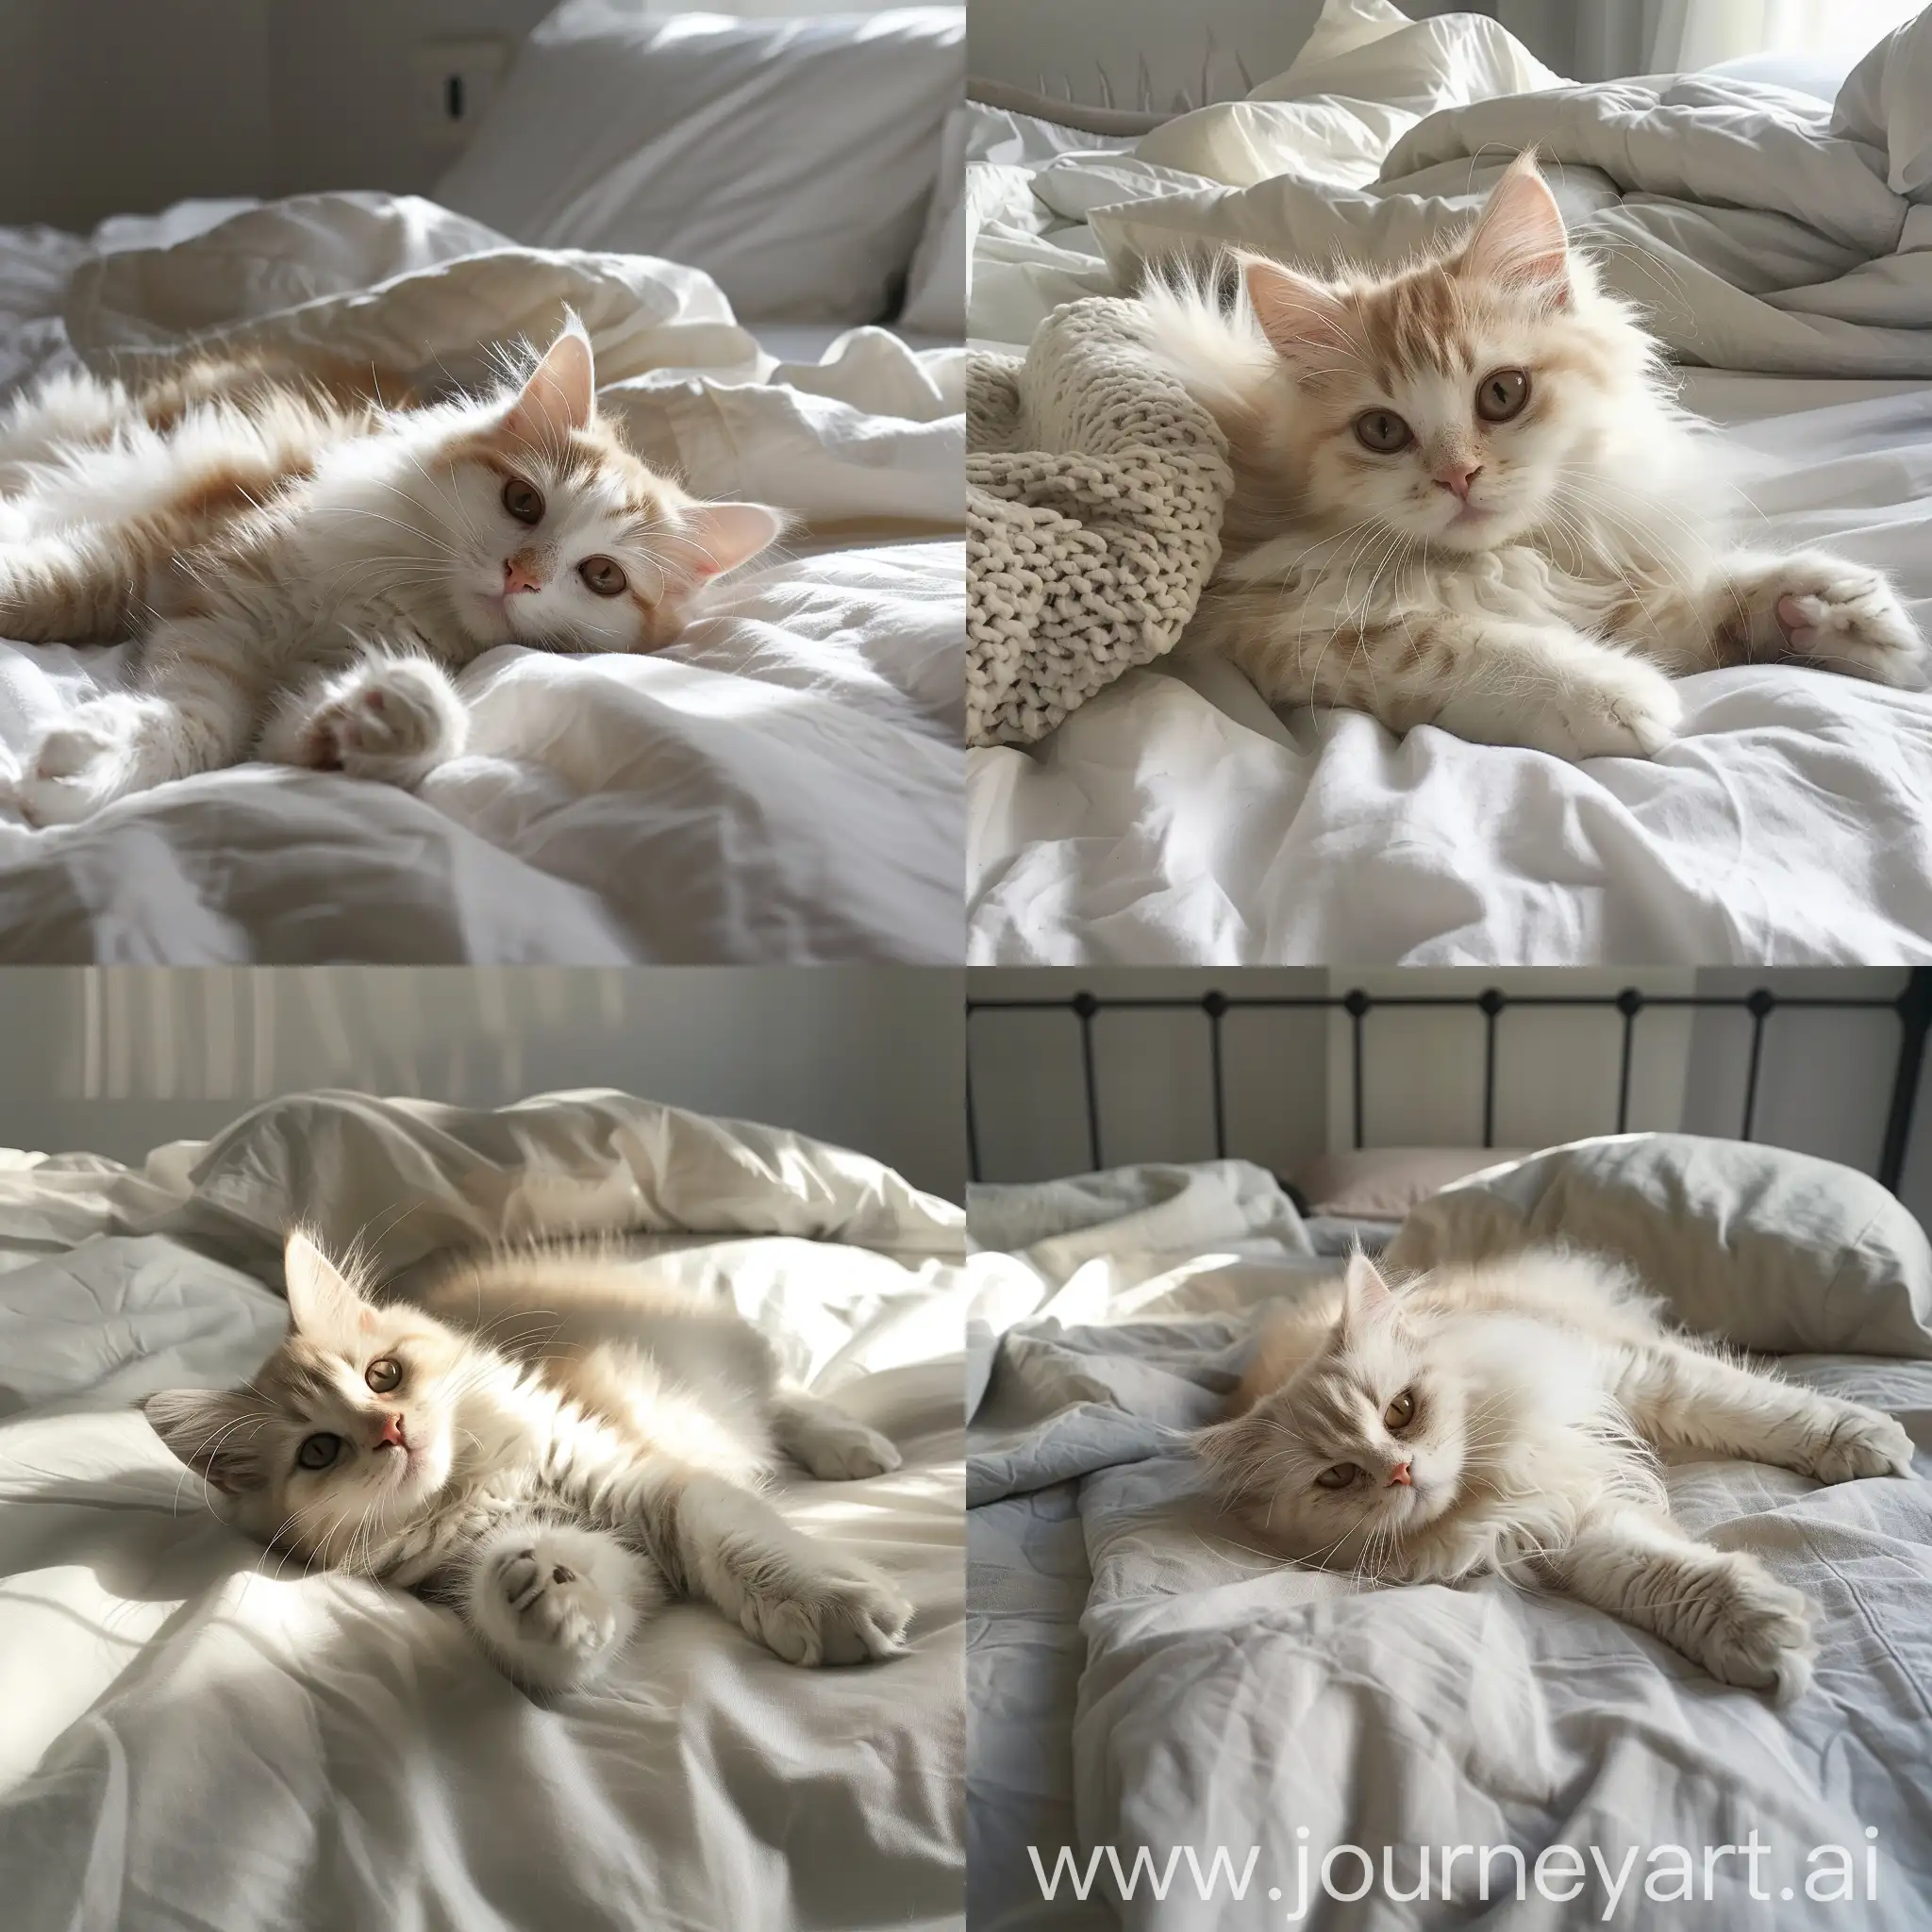 Adorable-Fluffy-White-Cat-Relaxing-on-Cozy-Bed